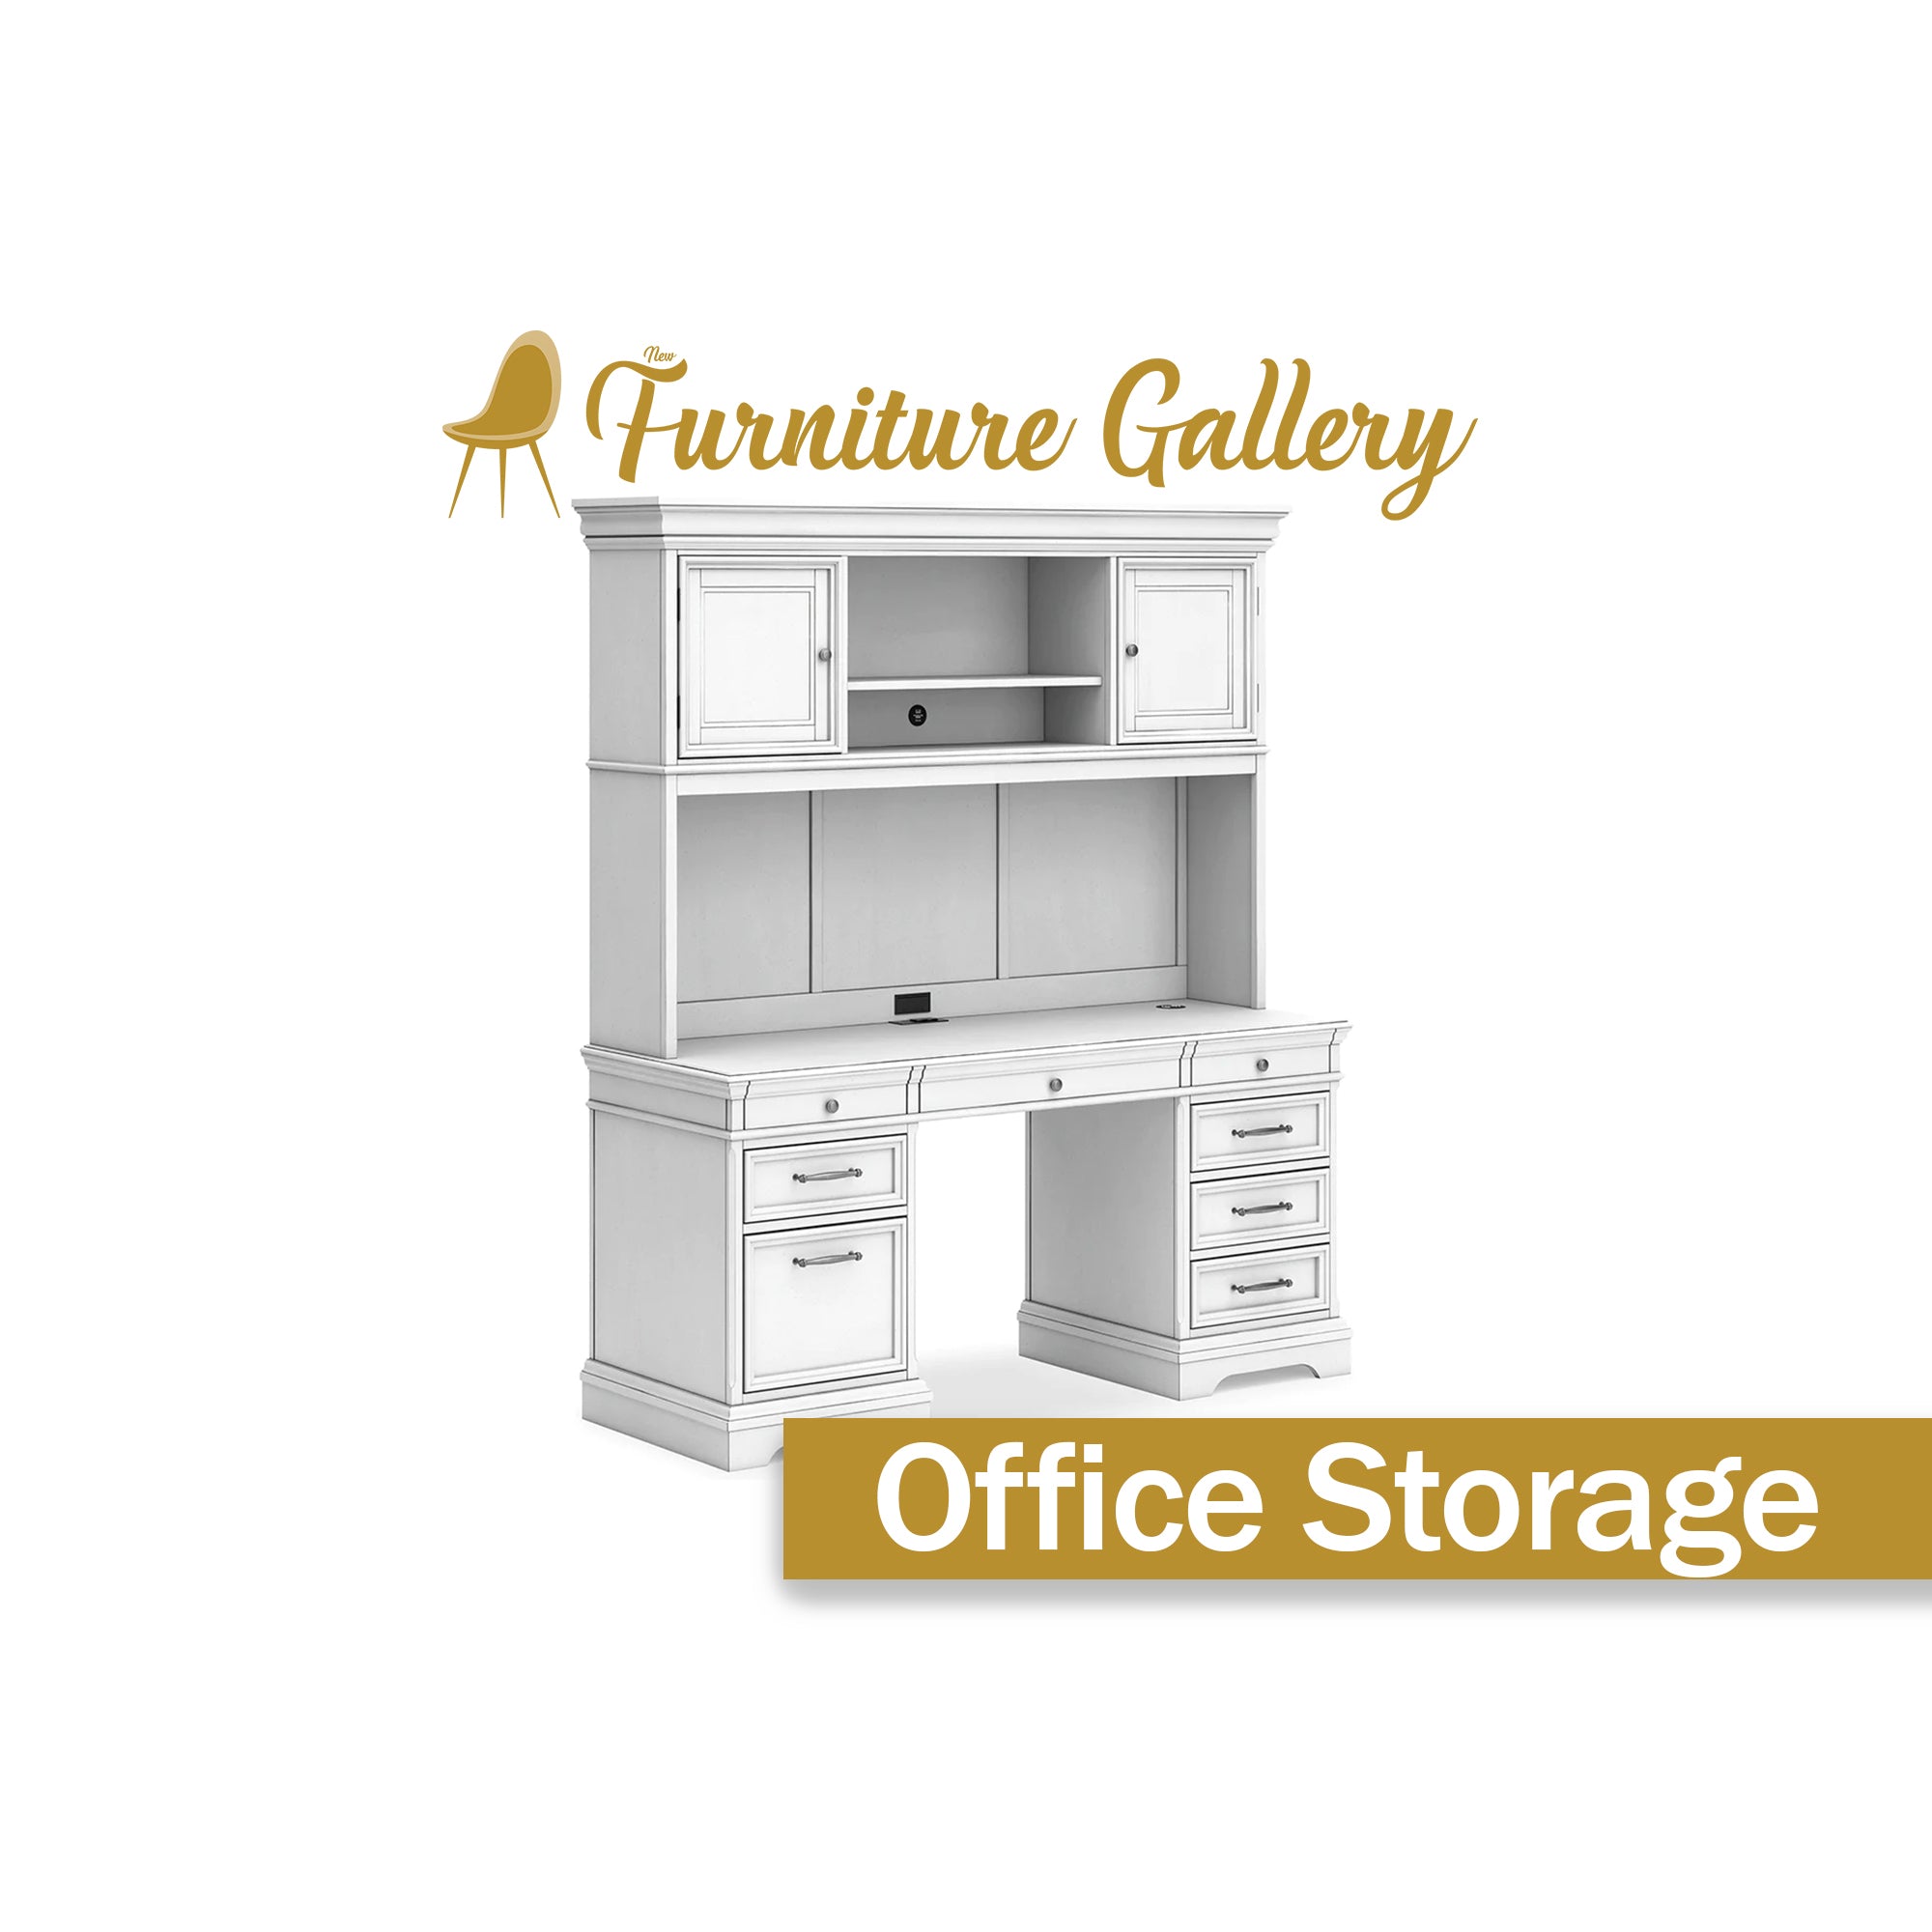 Office storage furniture by New Furniture Gallery. 